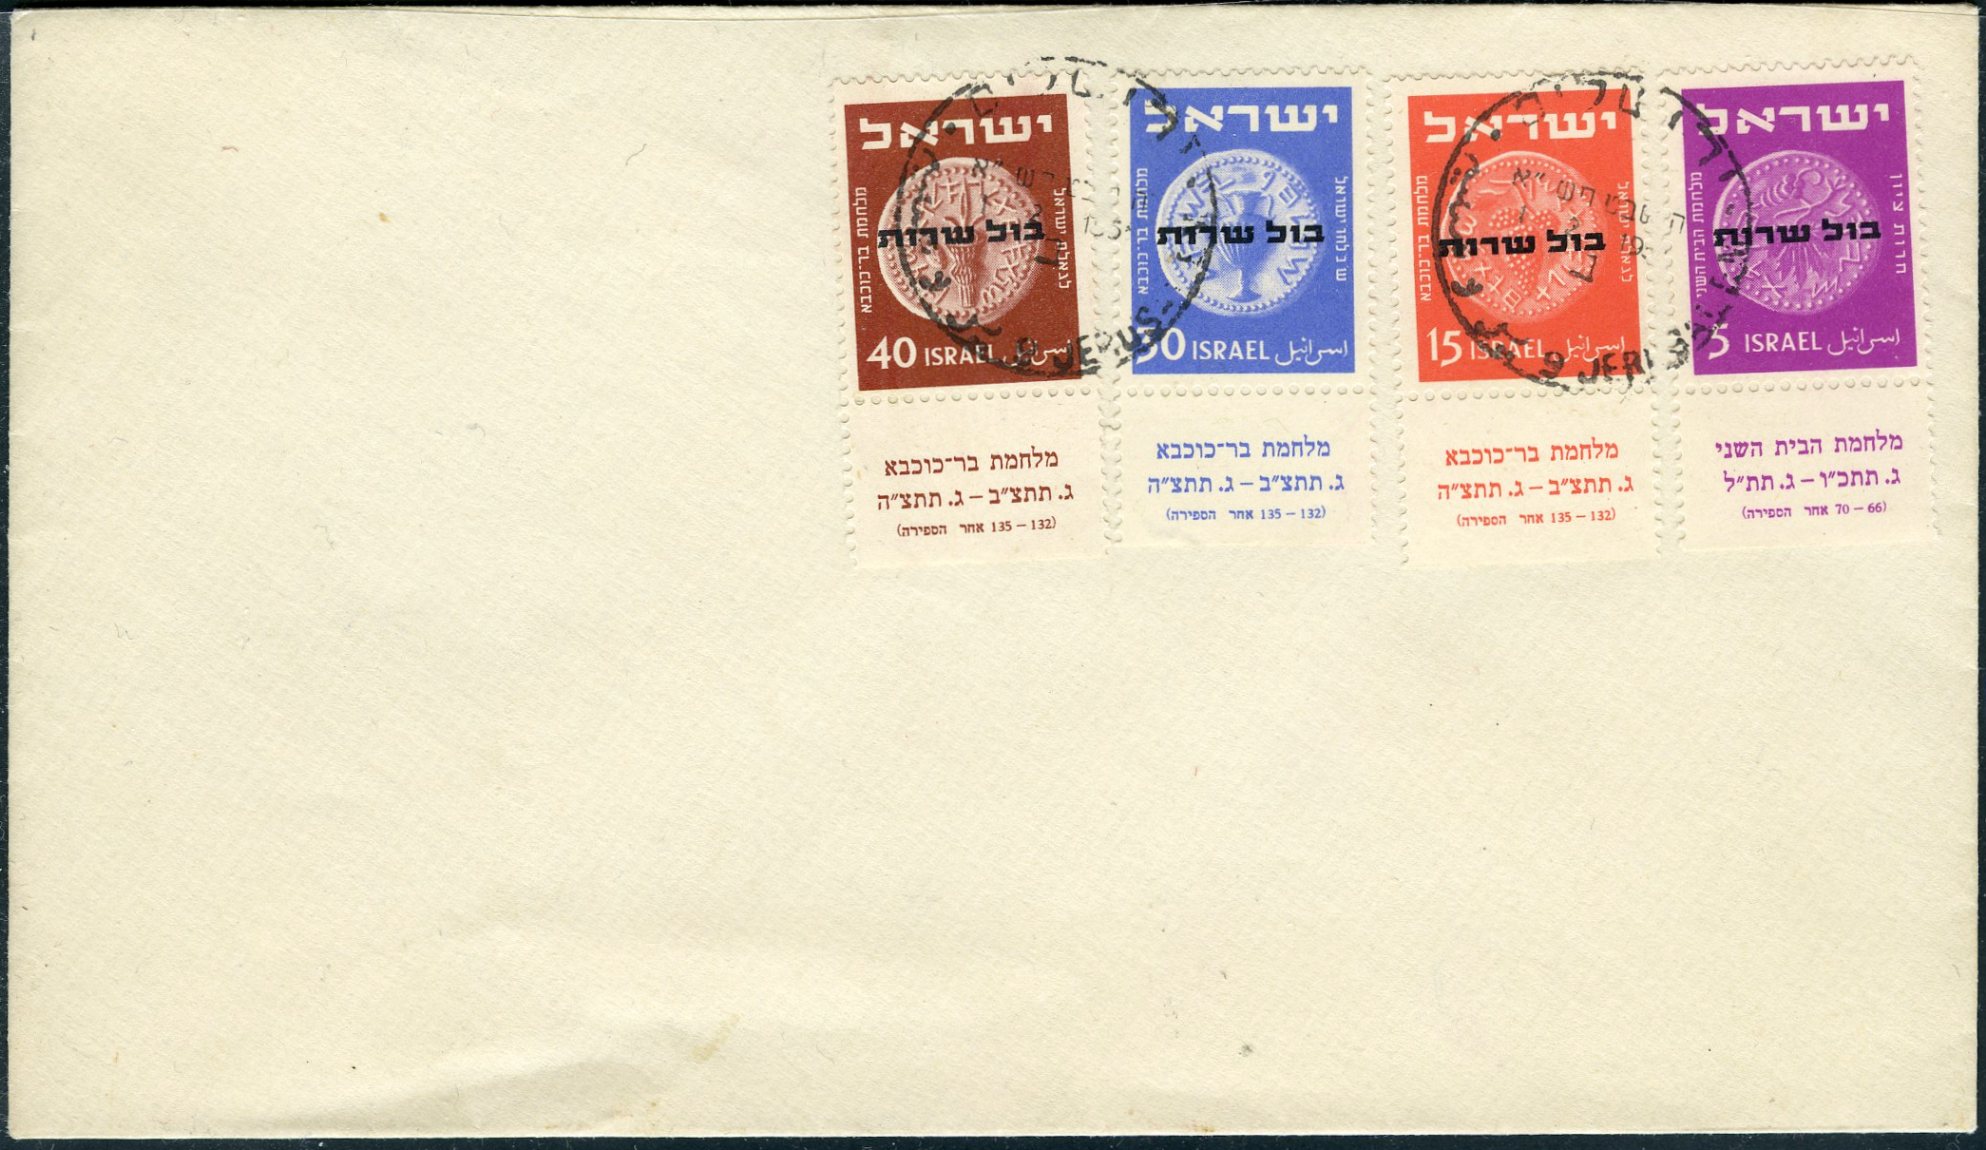 Lot 320 - ISRAEL: ISSUES, FDC's, PLATE BLOCKS & BOOKLETS  -  Tel Aviv Stamps Ltd. Auction #50